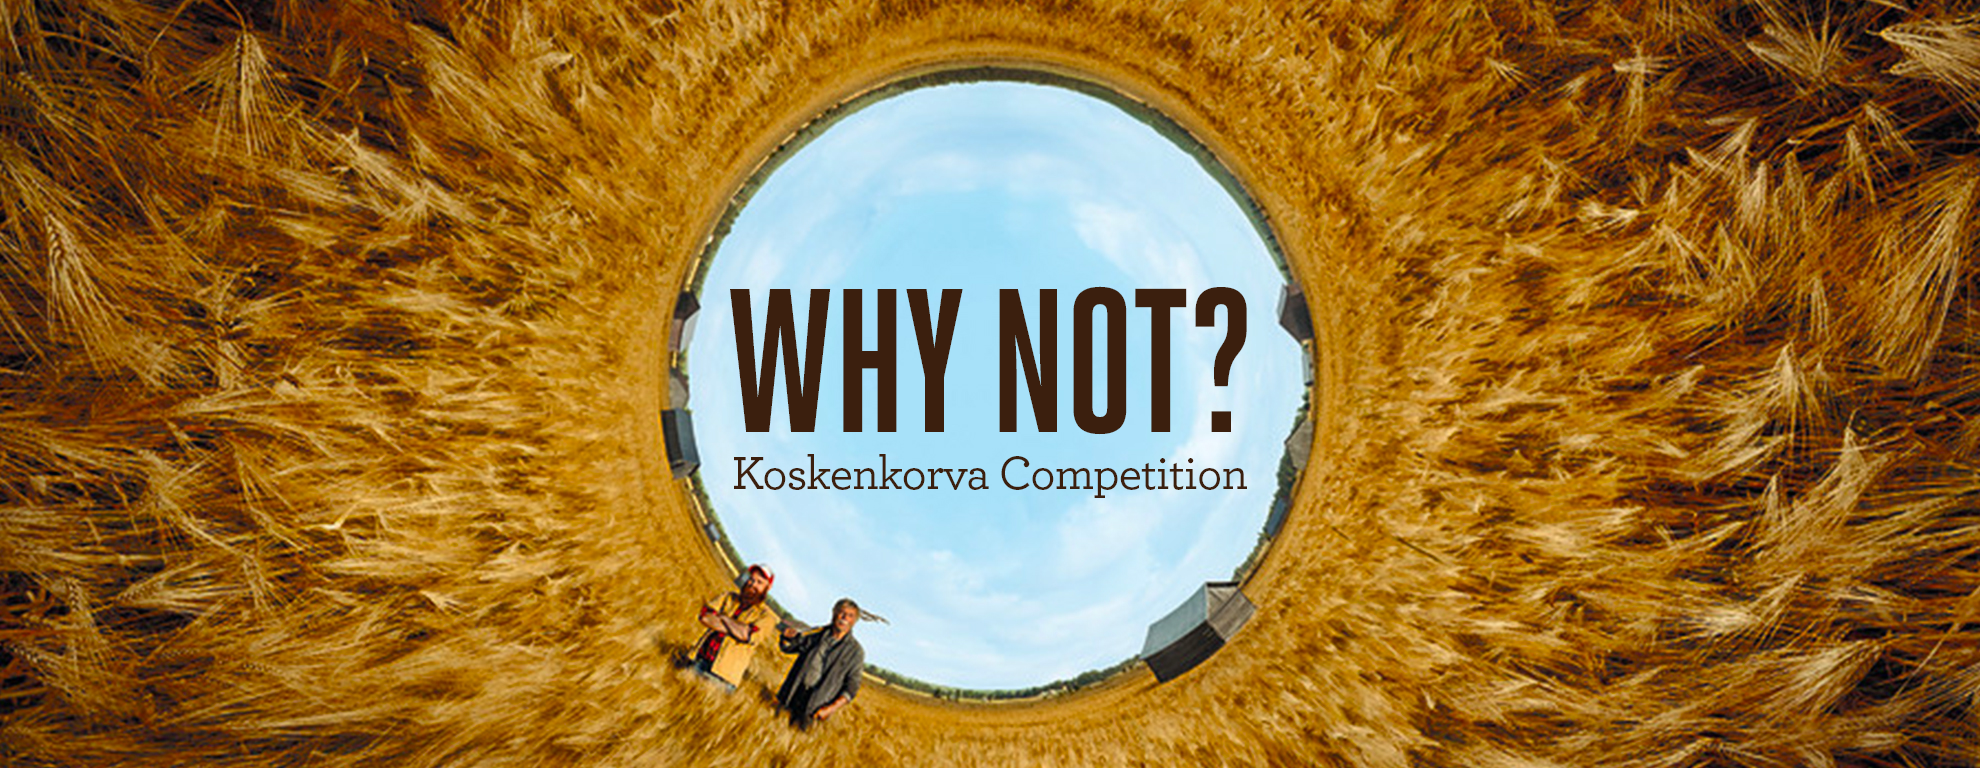 Why Not? Koskenkorva Competition